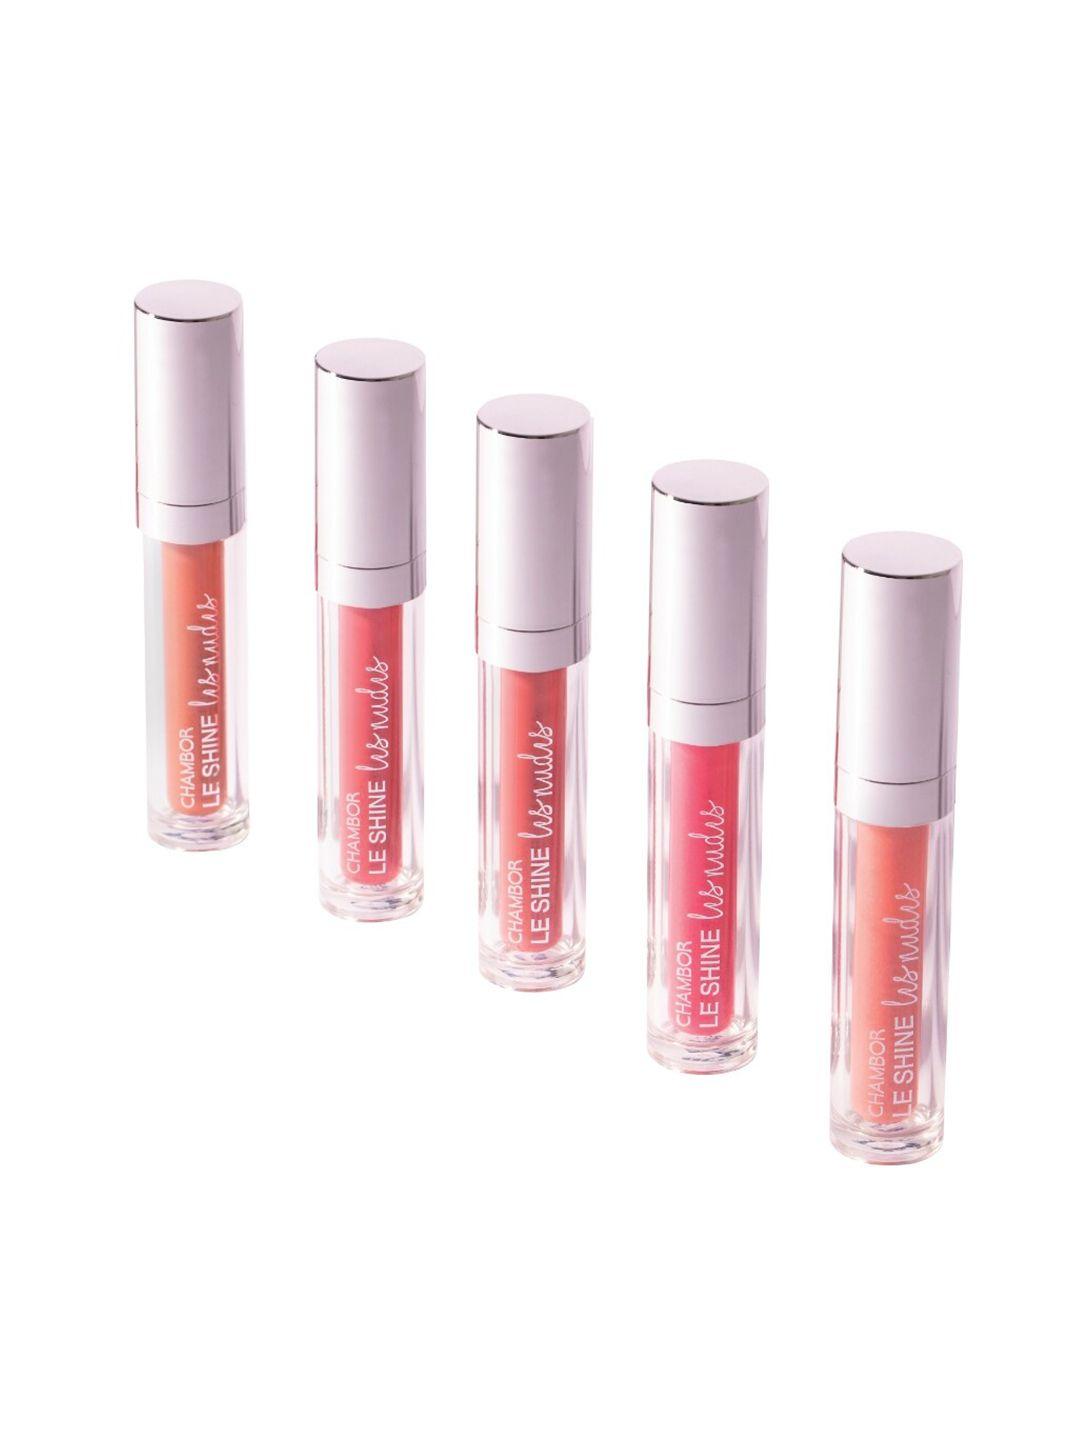 le shine les nudes limited edition plumping effect lip gloss 4.5ml - bises #207